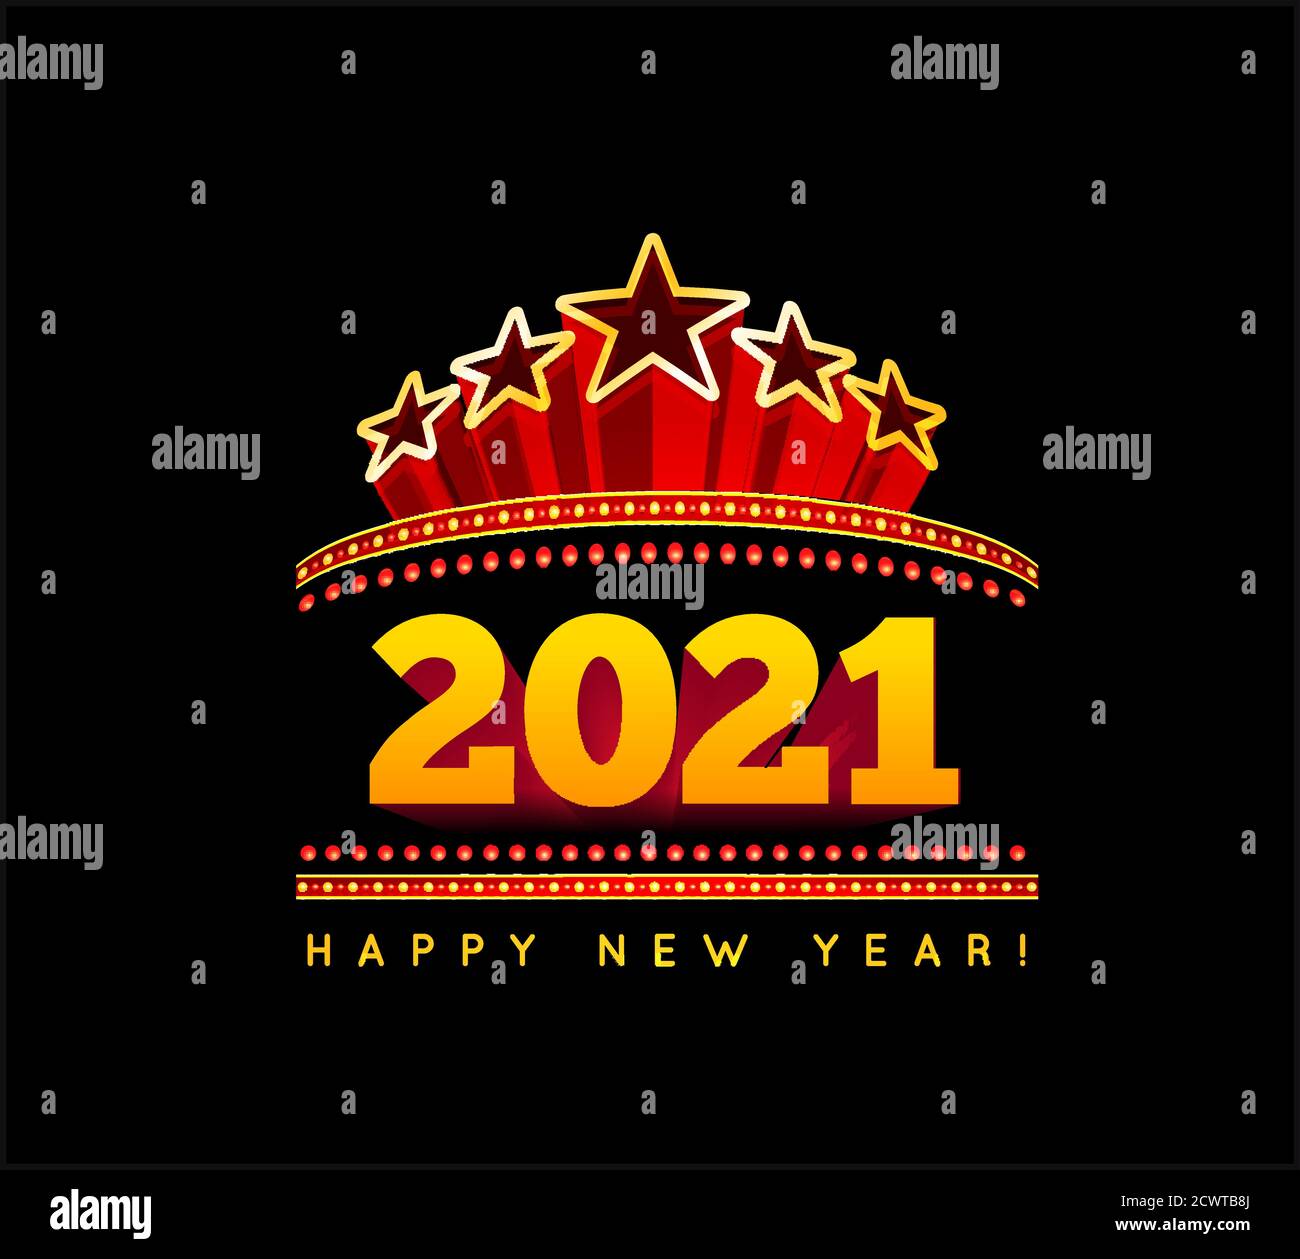 New Year marquee 2021. Vector illustration Stock Vector